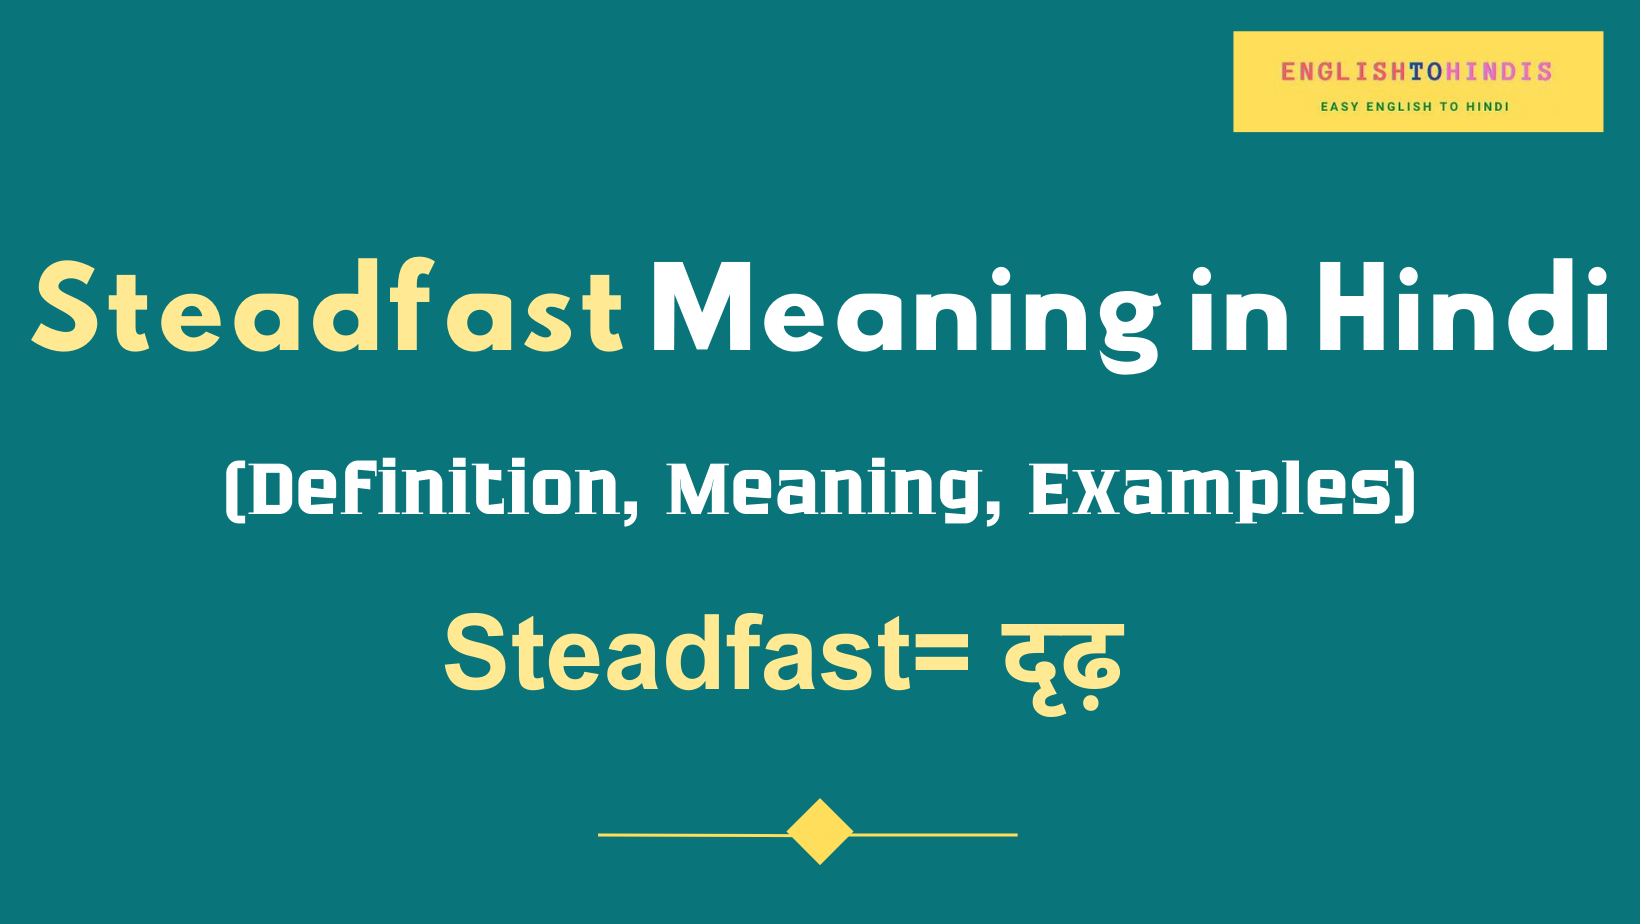 Steadfast Meaning in Hindi